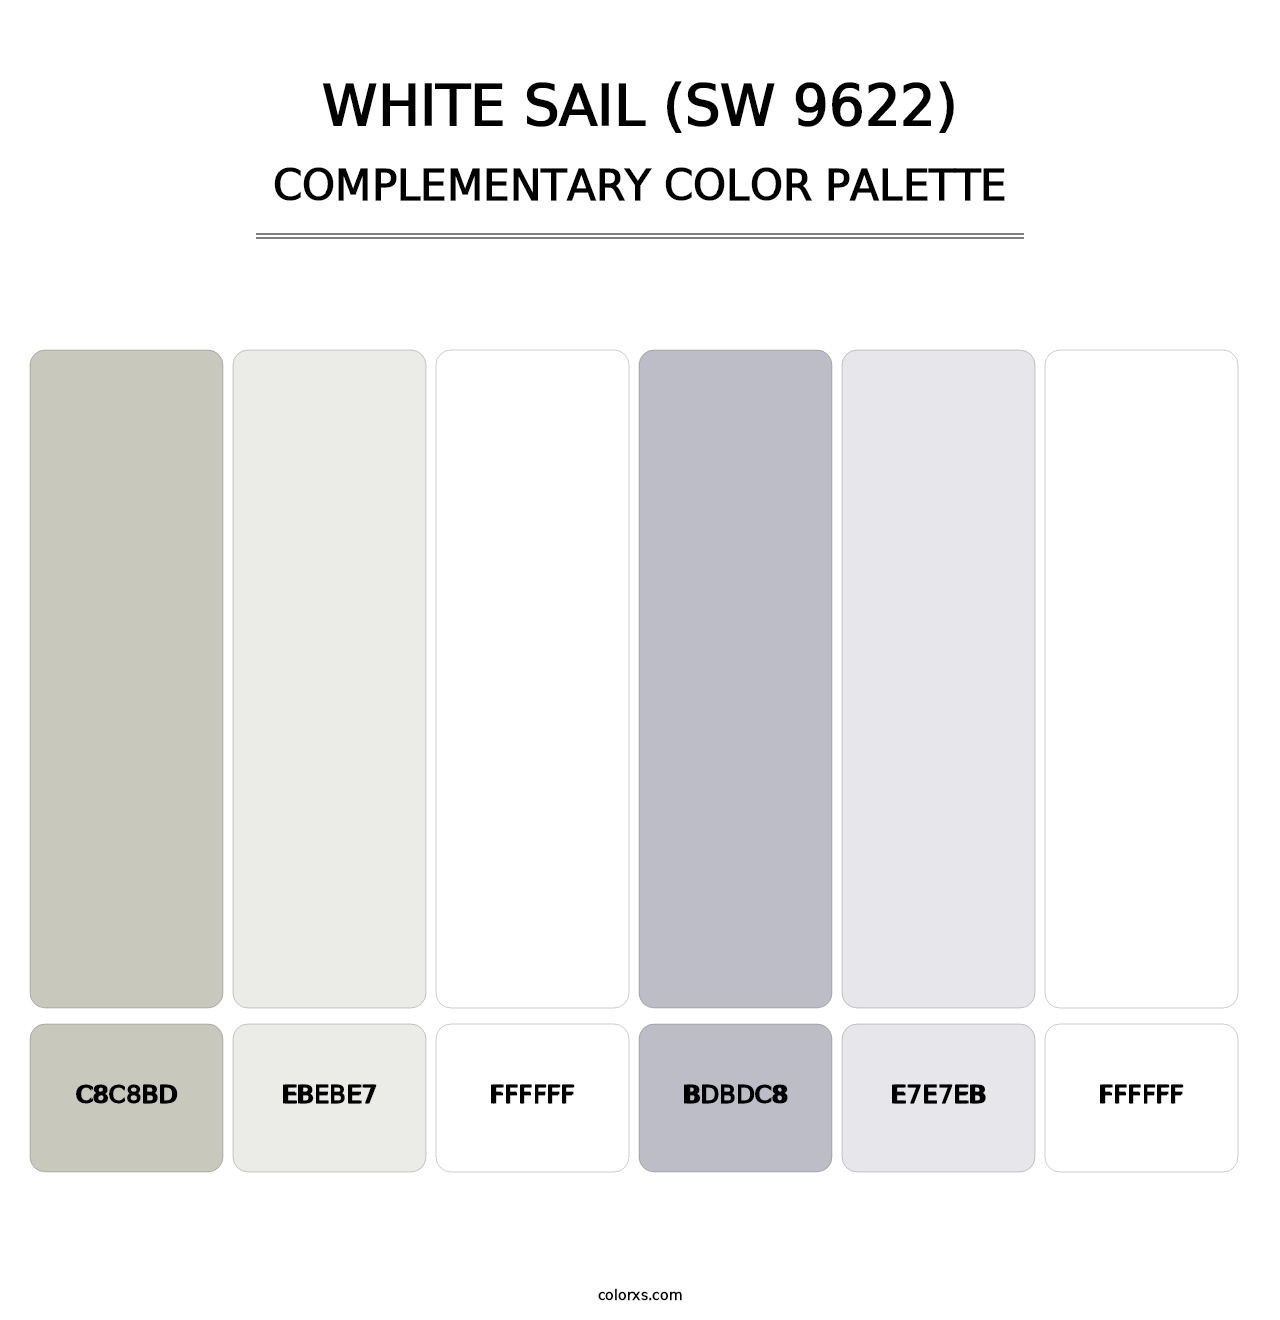 White Sail (SW 9622) - Complementary Color Palette